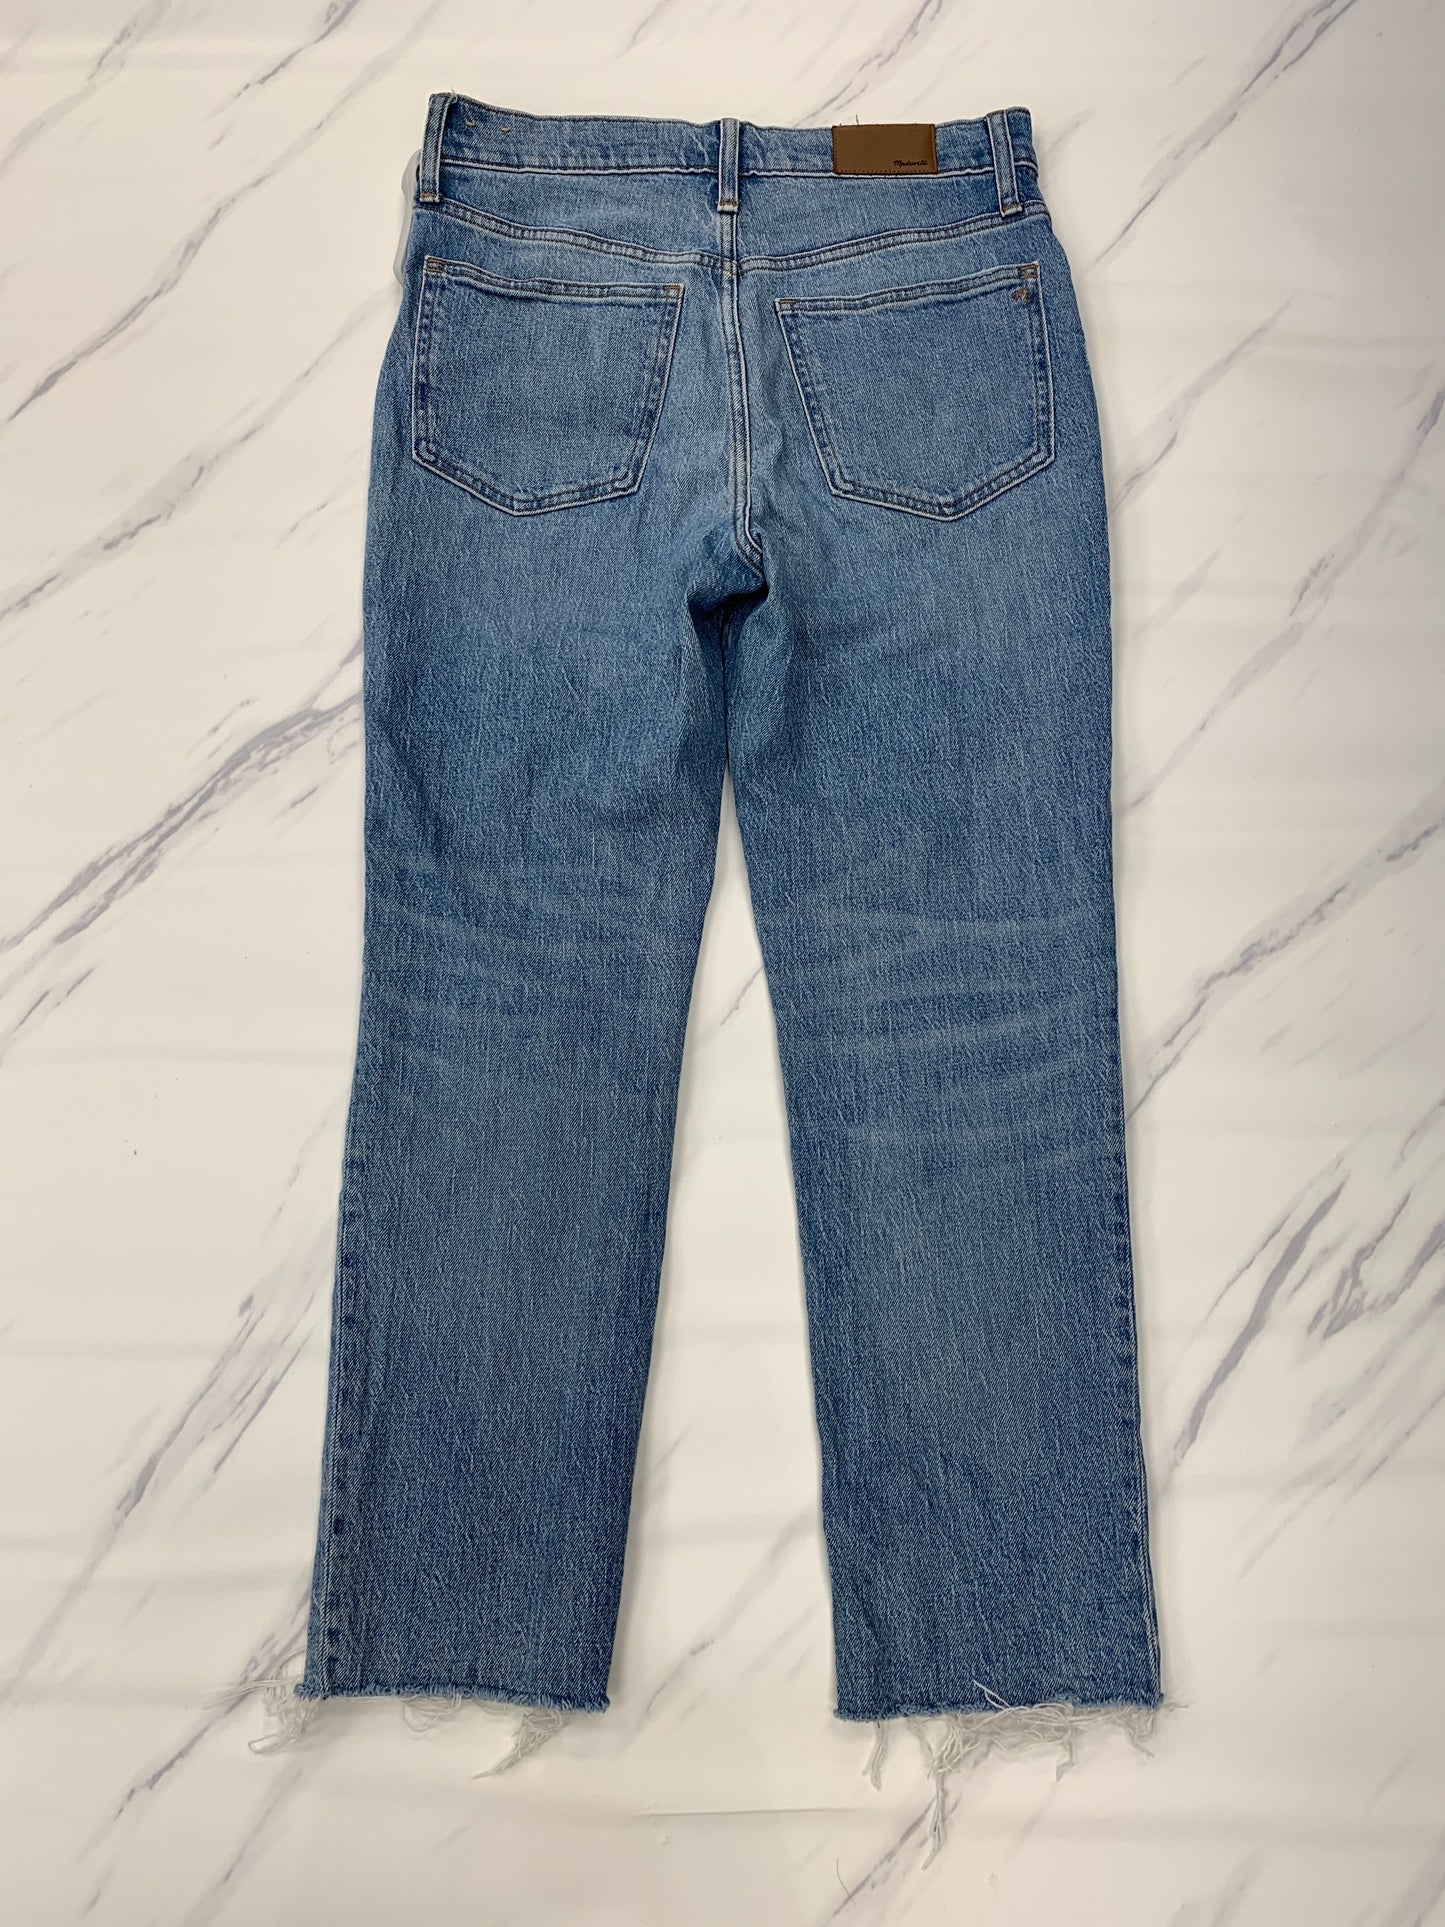 Jeans Straight Madewell, Size 6